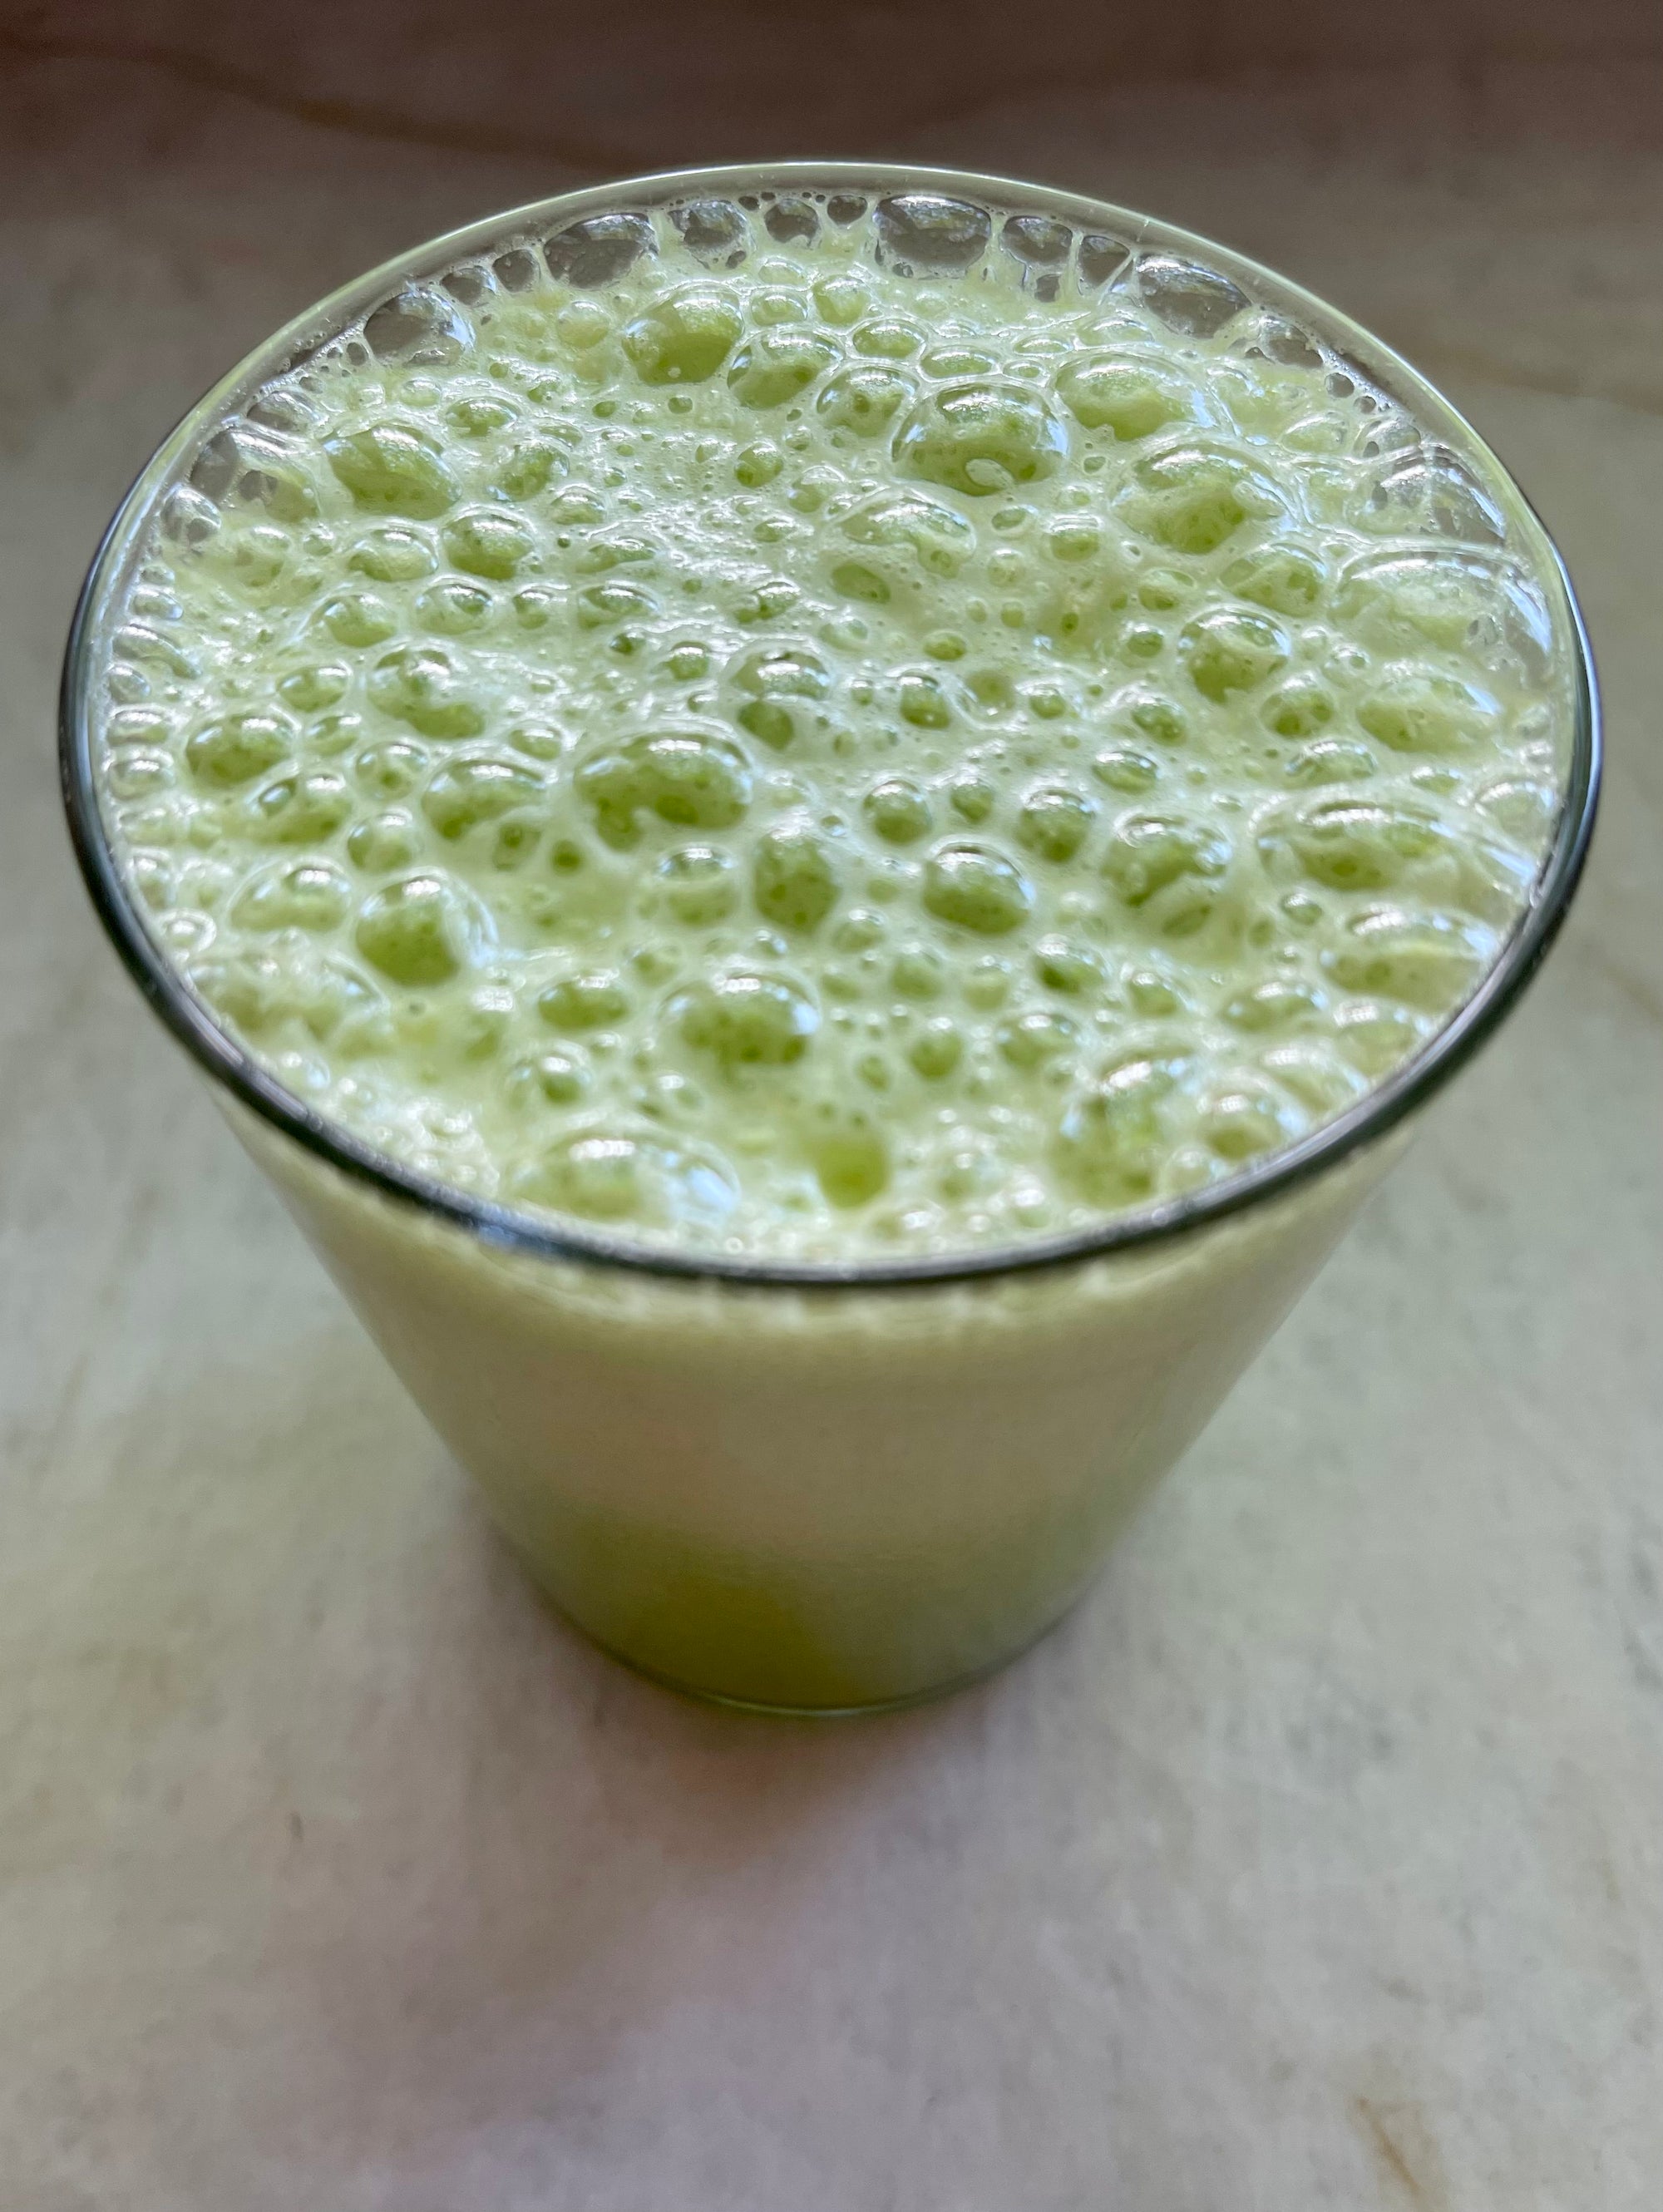 Blender: Green Juice Smoothie & New Year's Resolutions